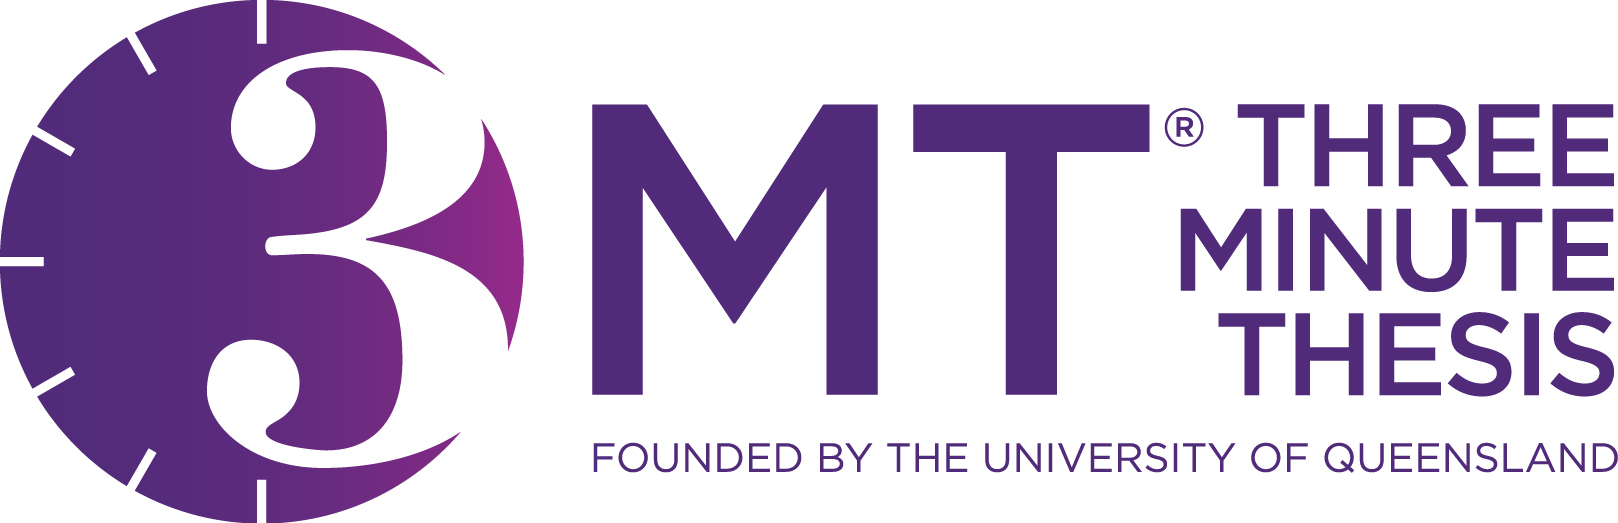 Official Three Minute Thesis Logo